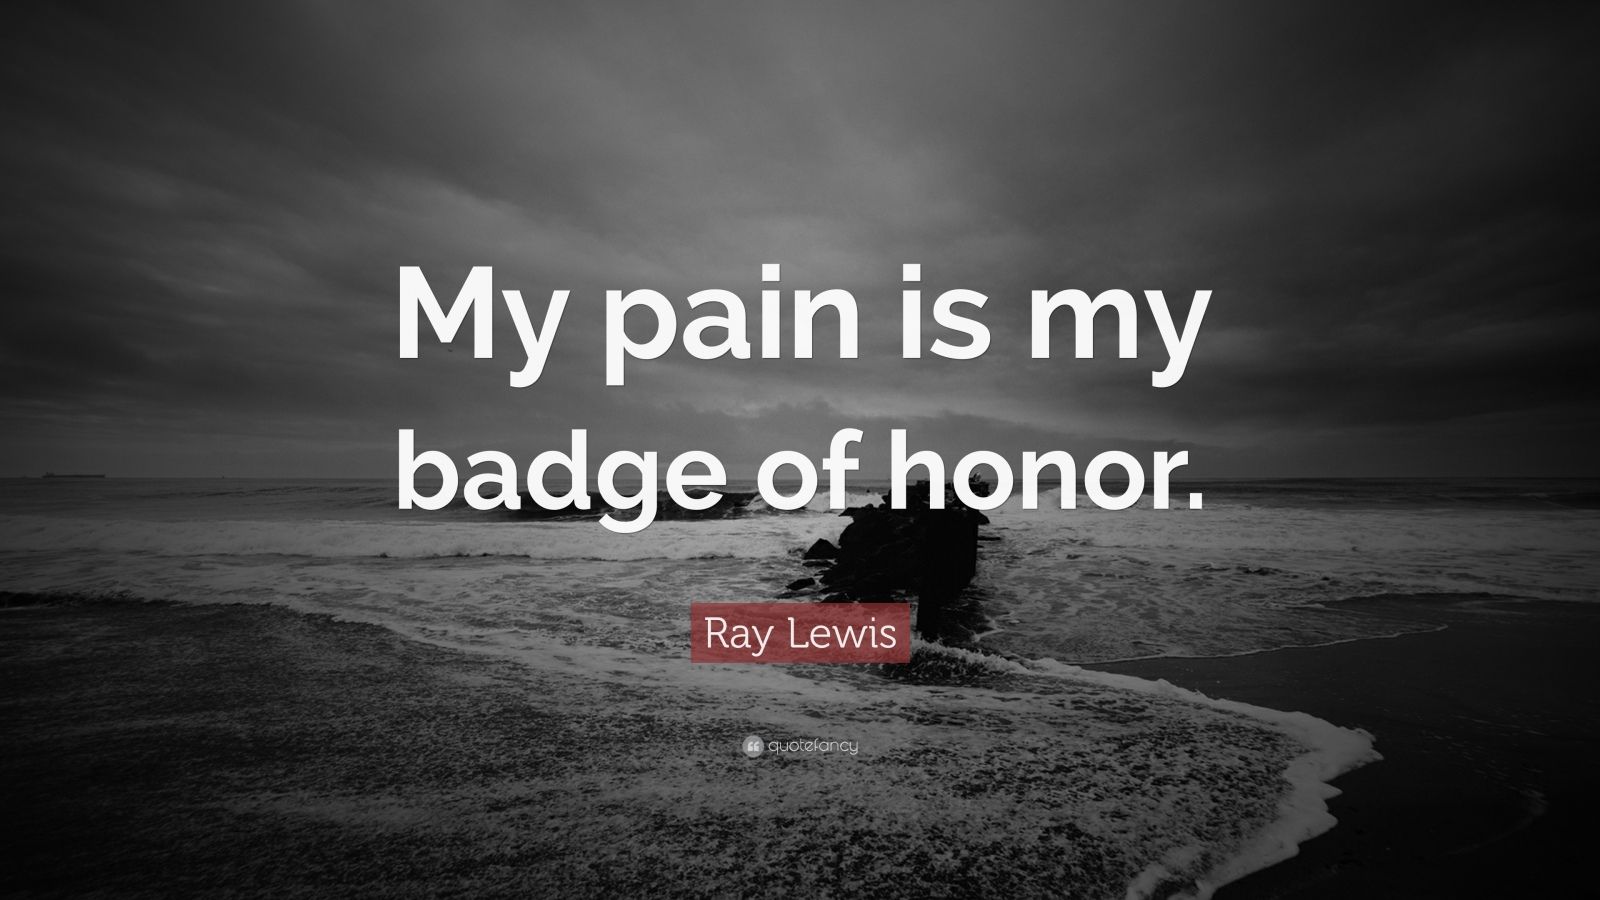 Ray Lewis Quotes (120 wallpapers) - Quotefancy1600 x 900